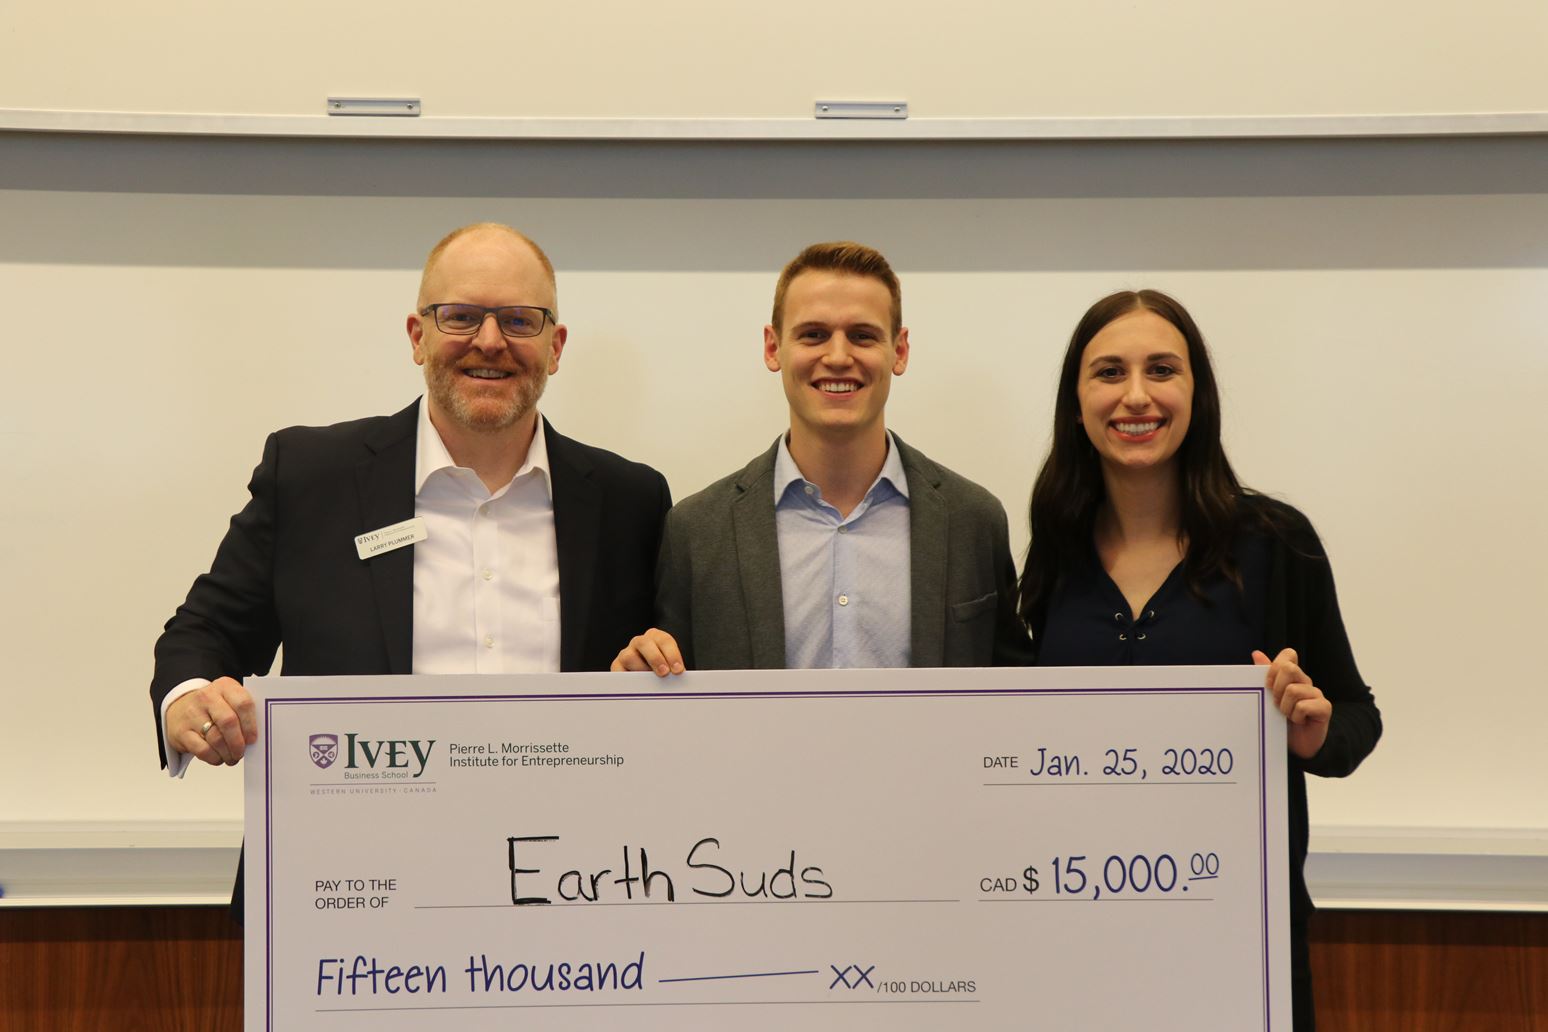 Team EarthSuds wins the HBA Business Plan Competition